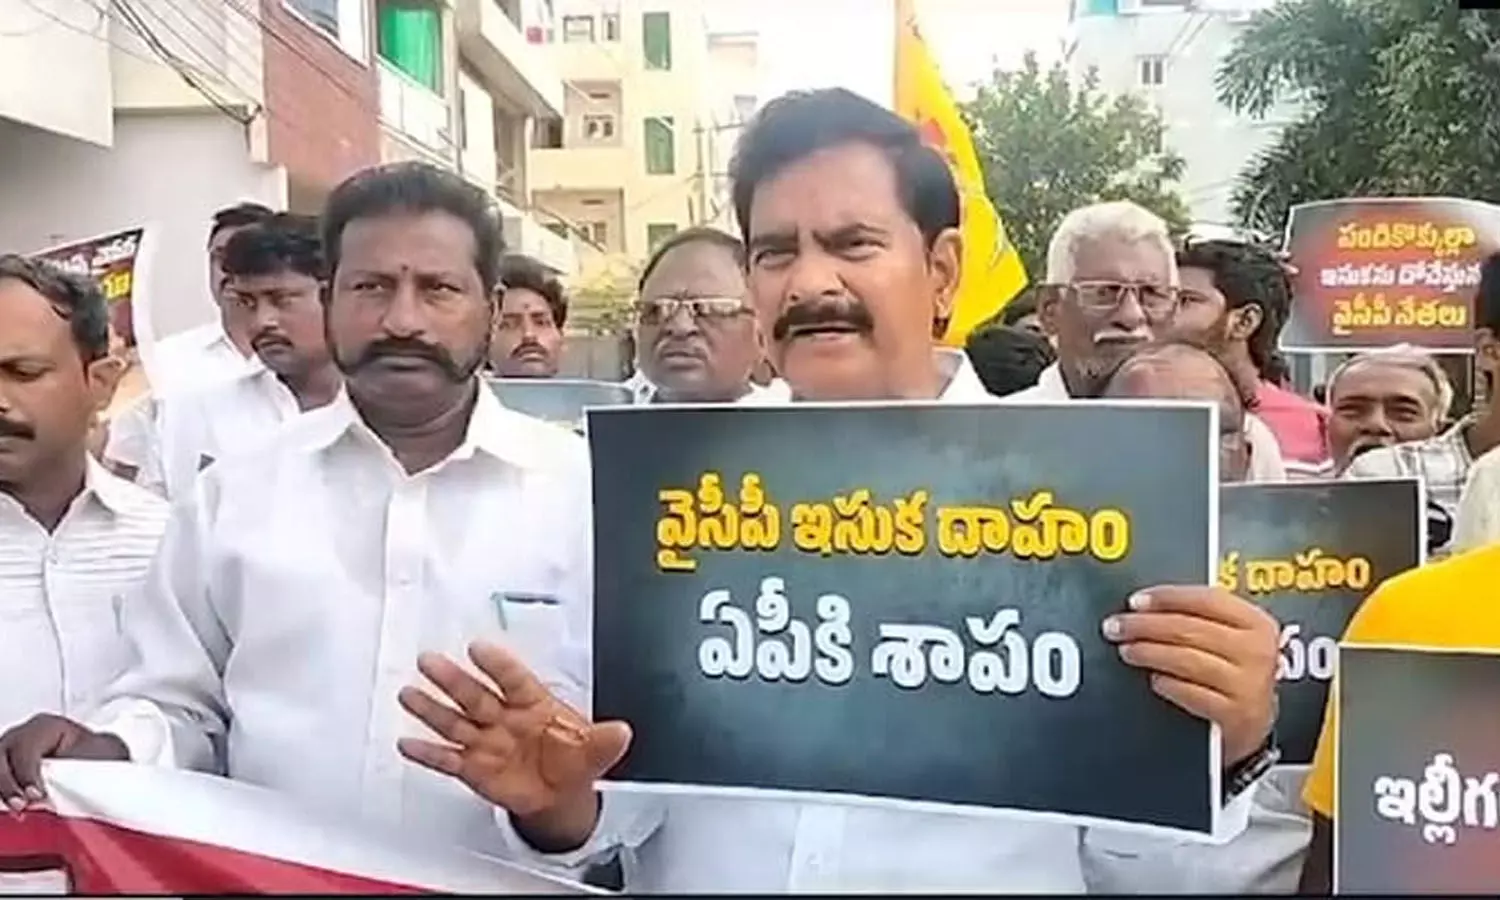 Andhra Pradesh: Police place many TDP leaders under house arrest before